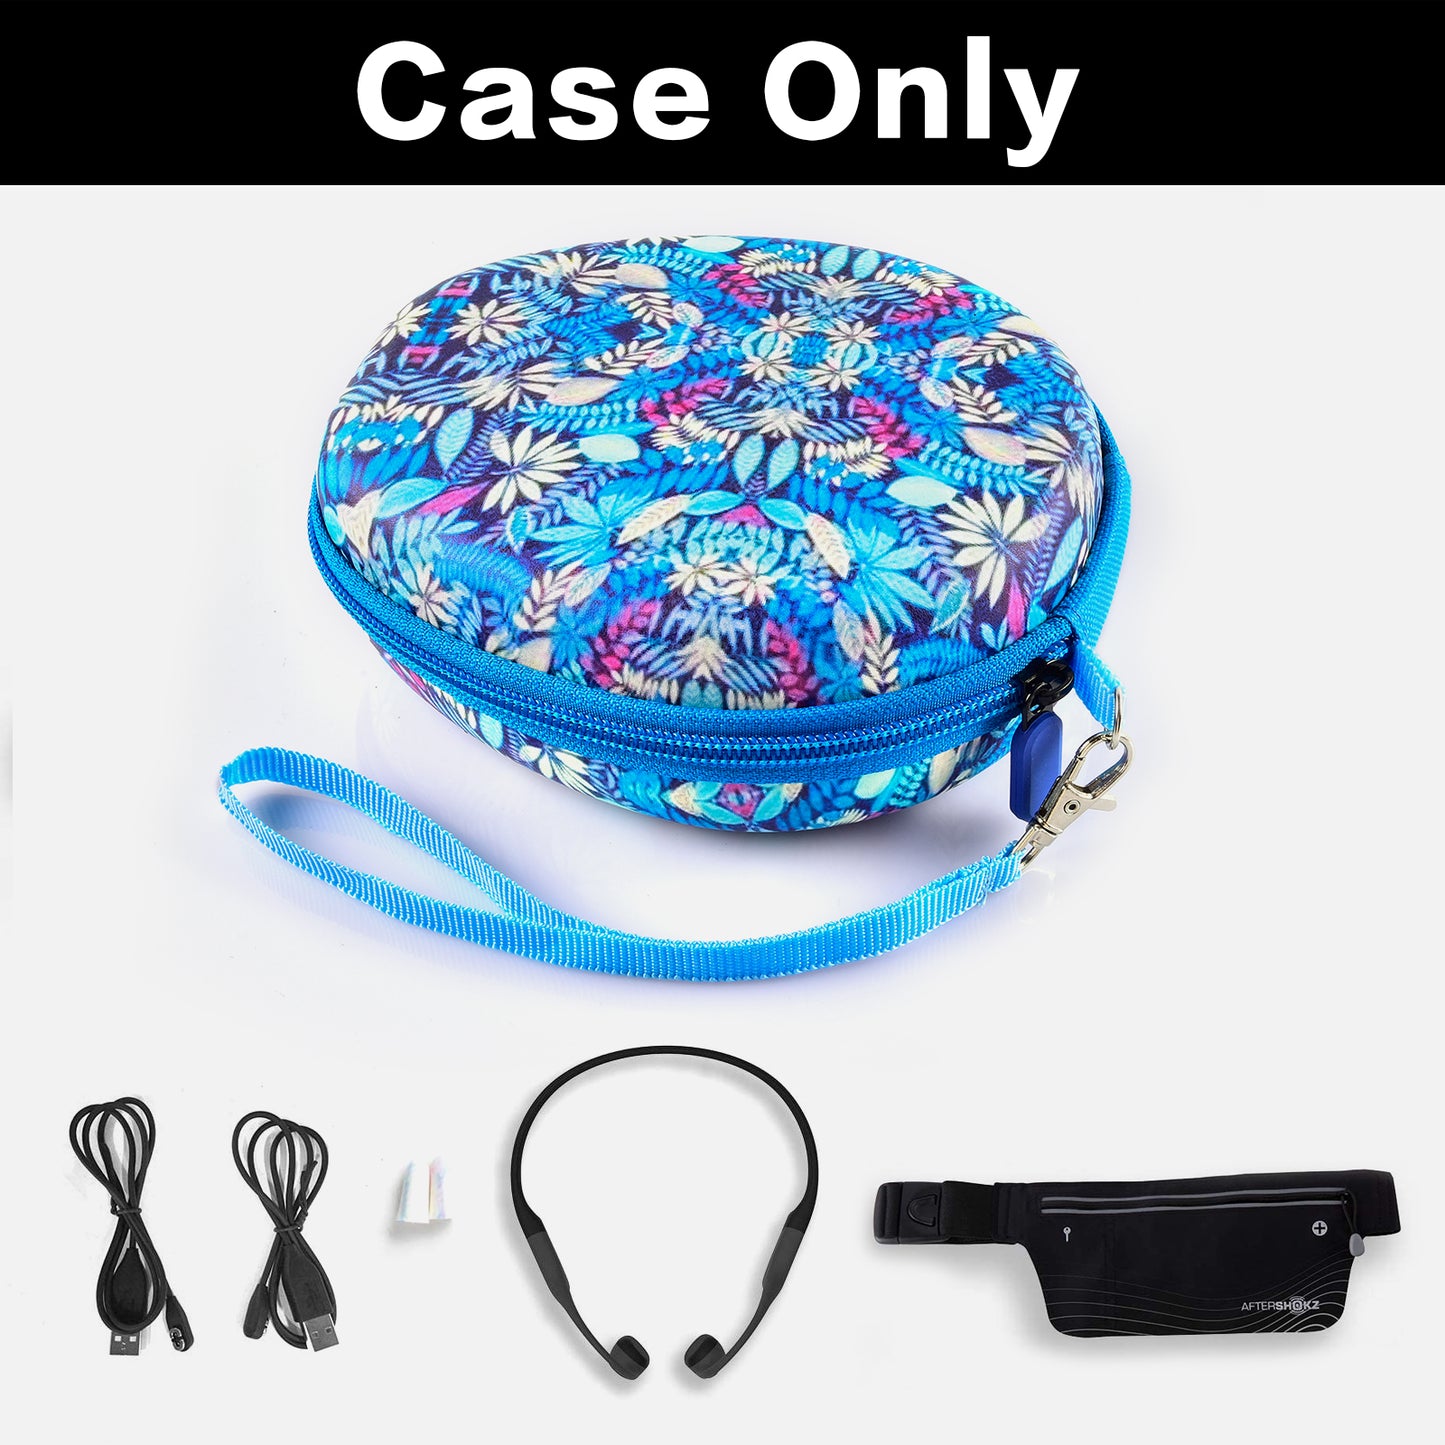 Case Compatible with AfterShokz Aeropex/ for Trekz Air/ for Titanium Mini Open Ear Wireless Bone Conduction Headphones AS650 / AS800, Storage Holder Fits for Earplugs, Cables and Accessories(Box Only)